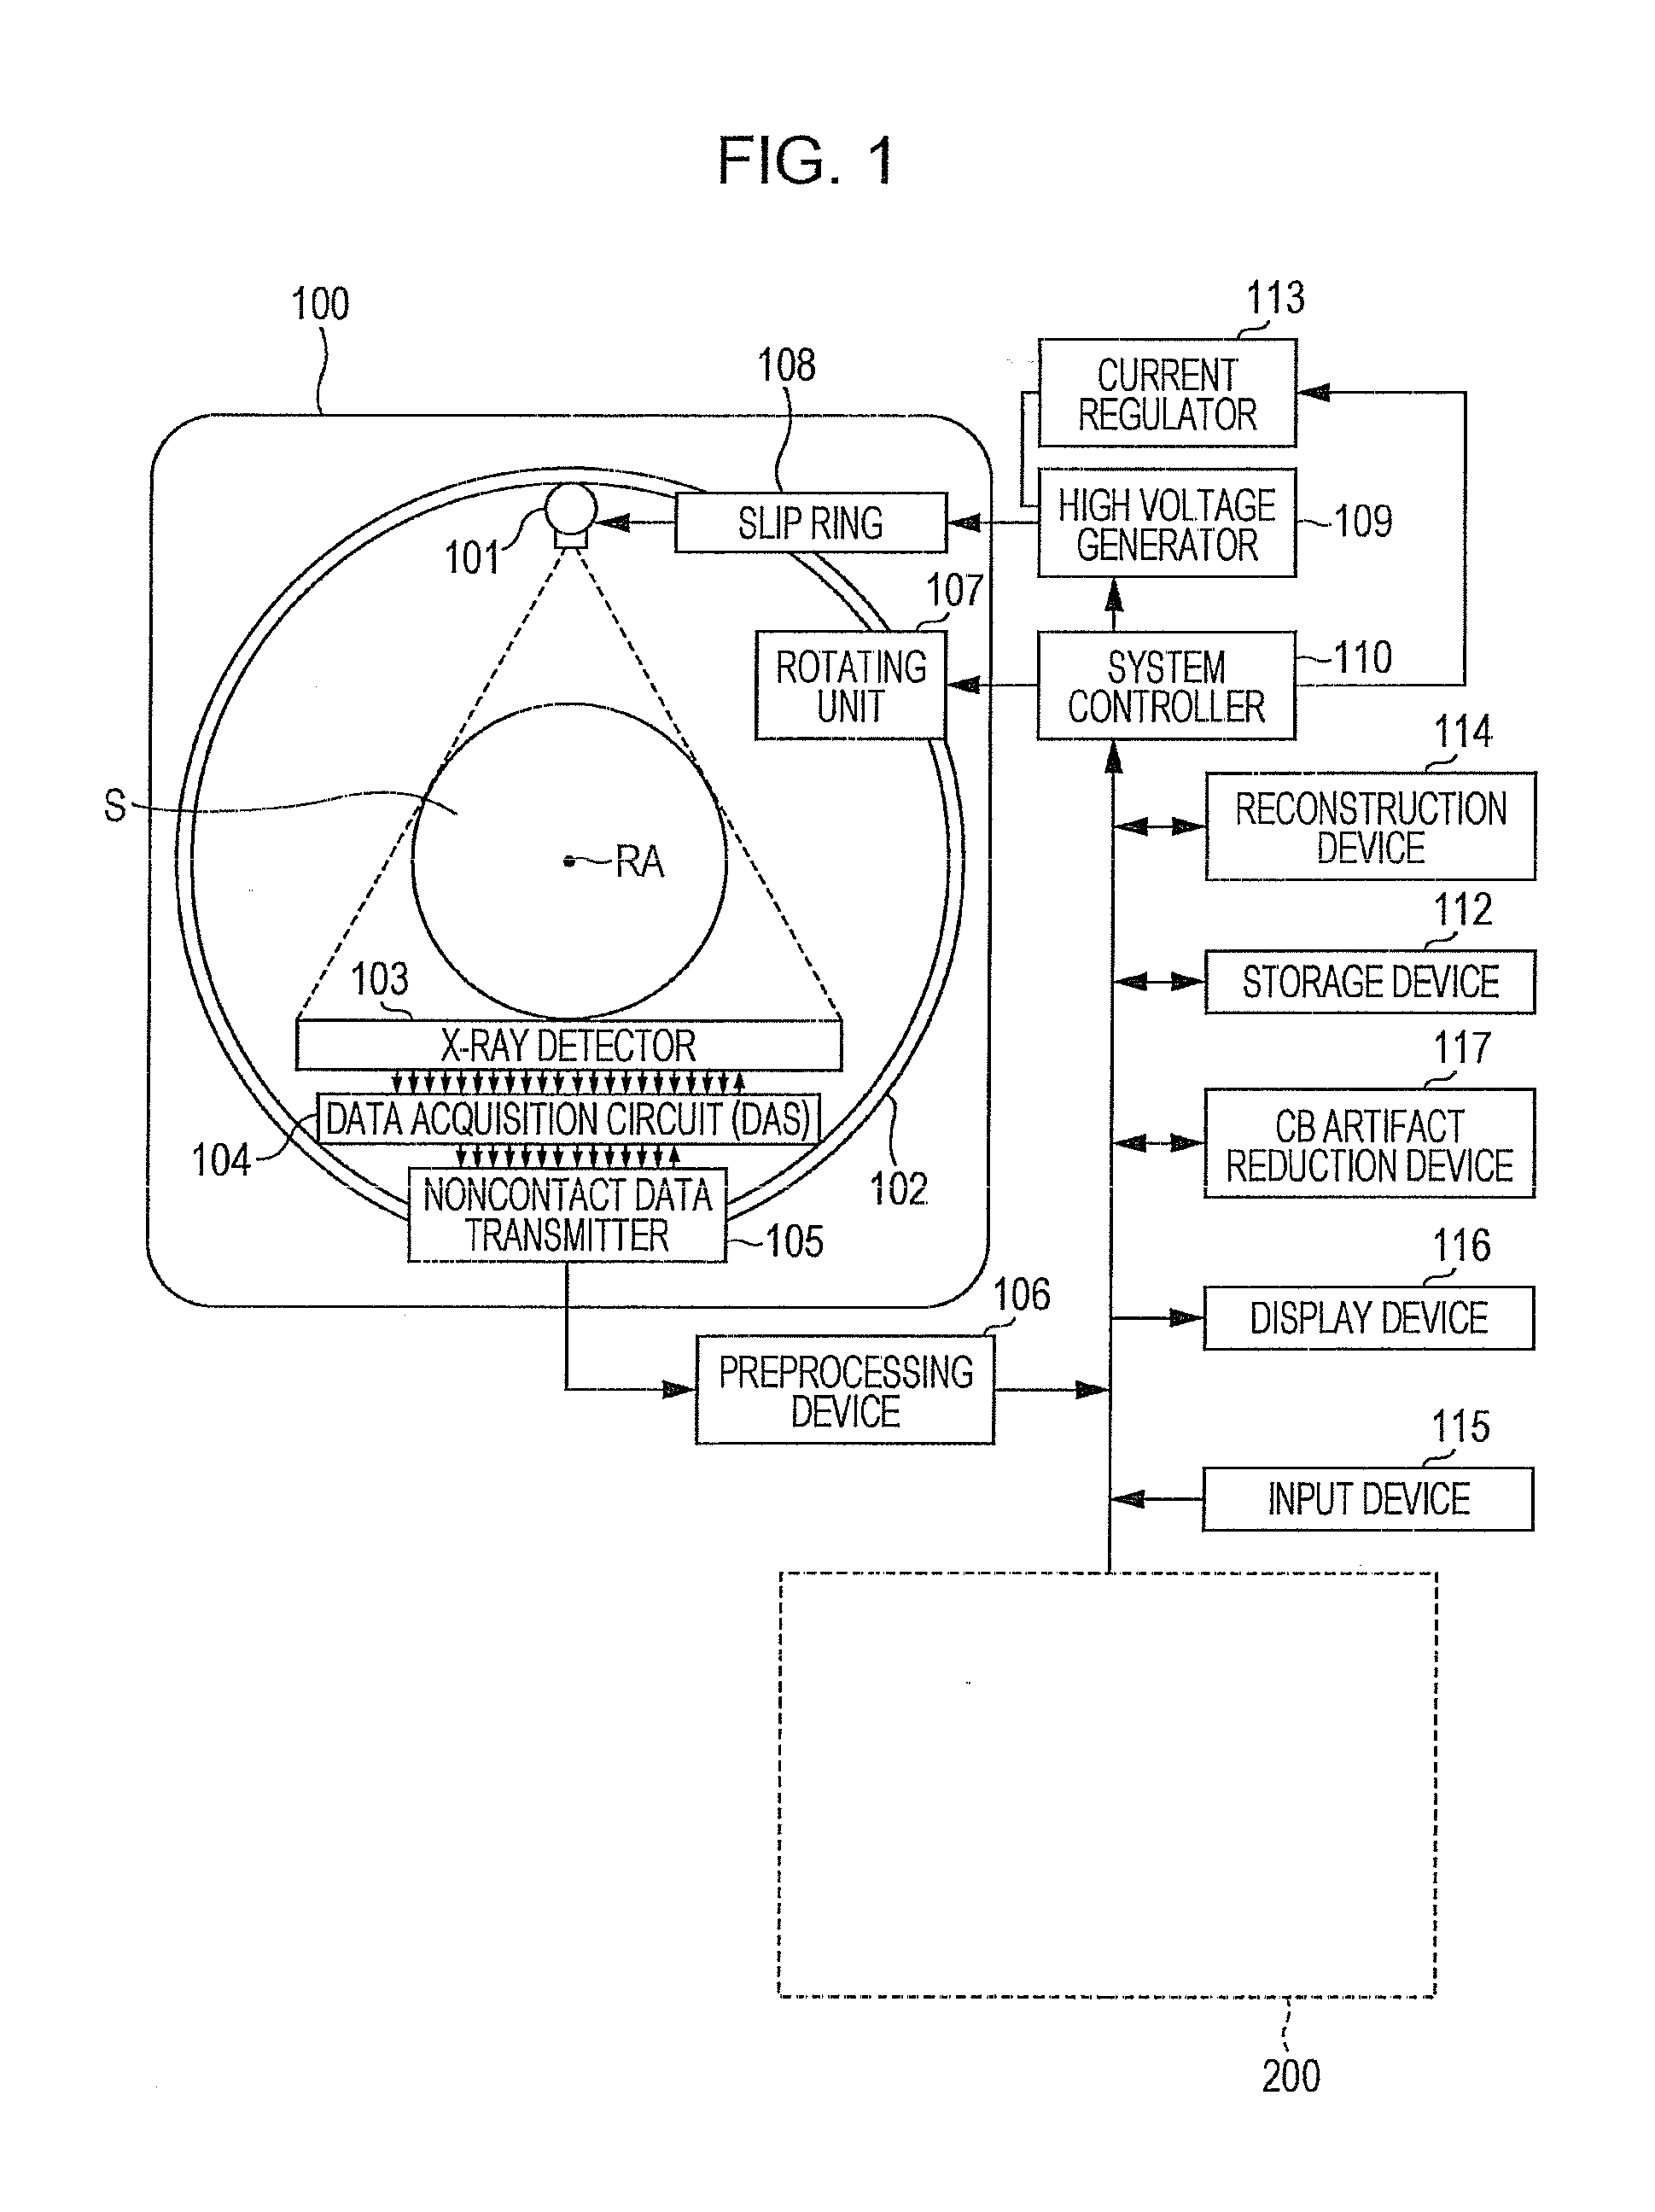 Method and system for substantially reducing artifacts in circular cone beam computer tomography (CT)